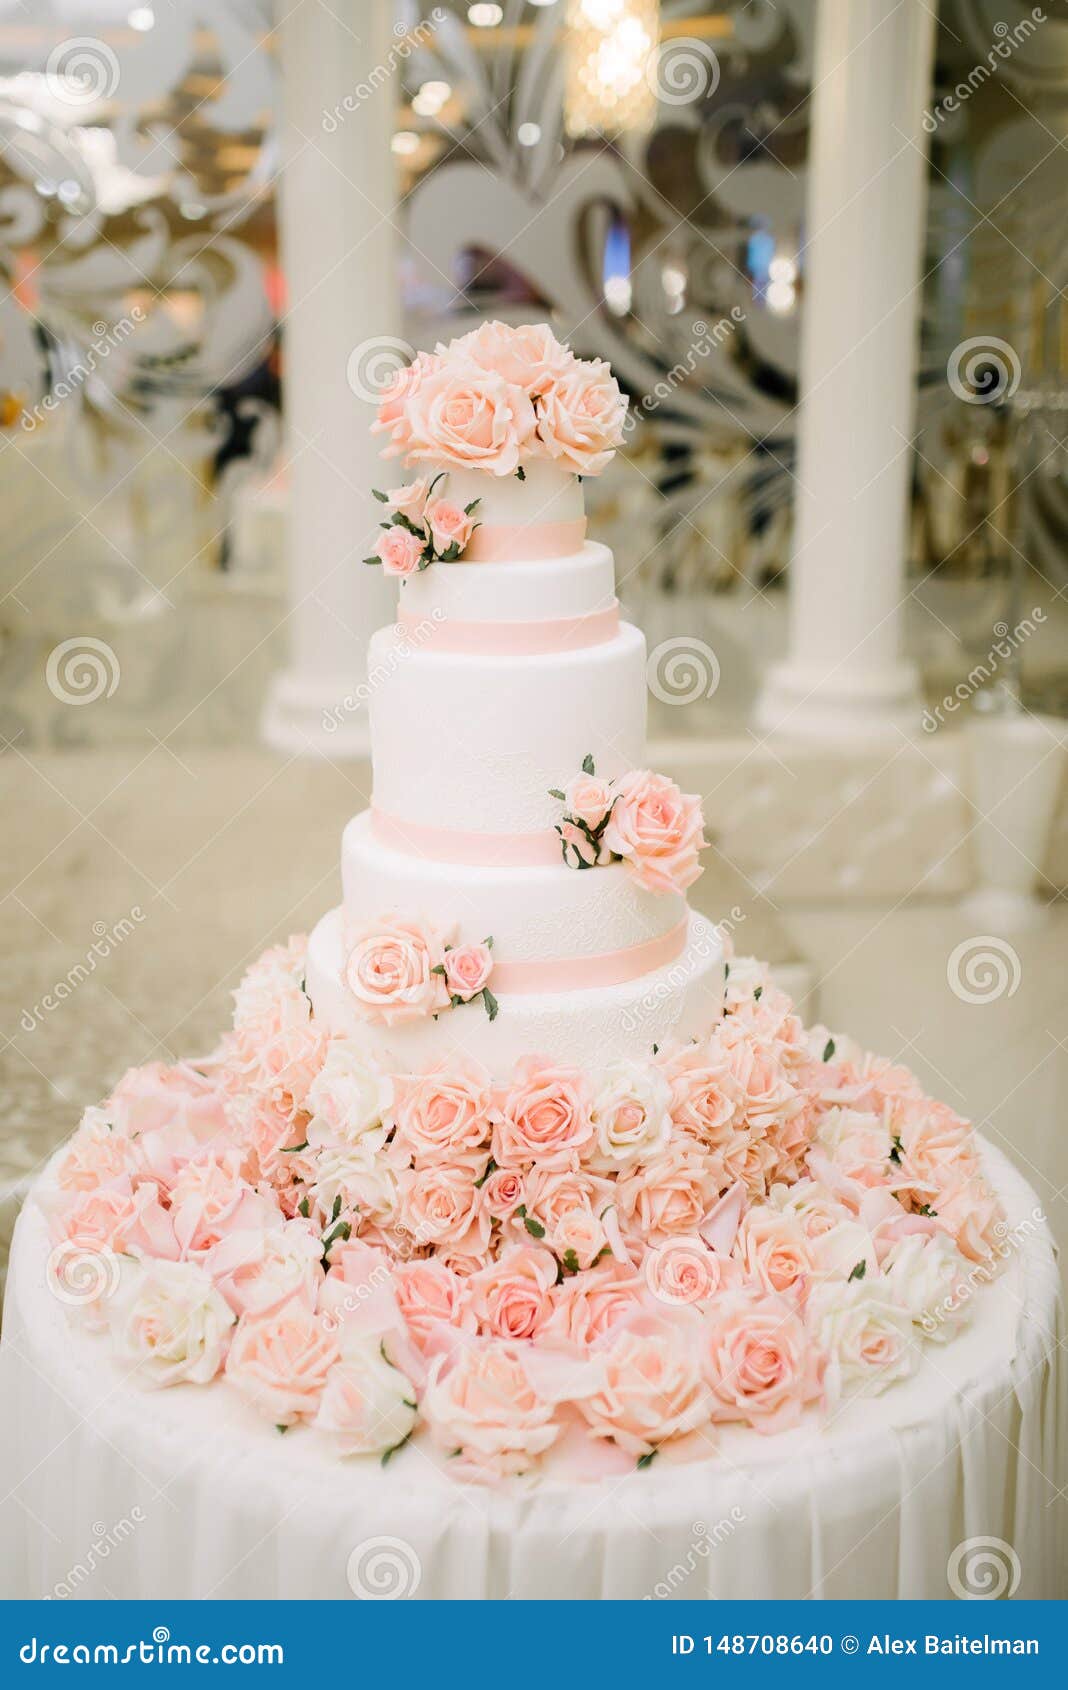 Big White Wedding Cake with Fruit is on the Table Stock Photo ...